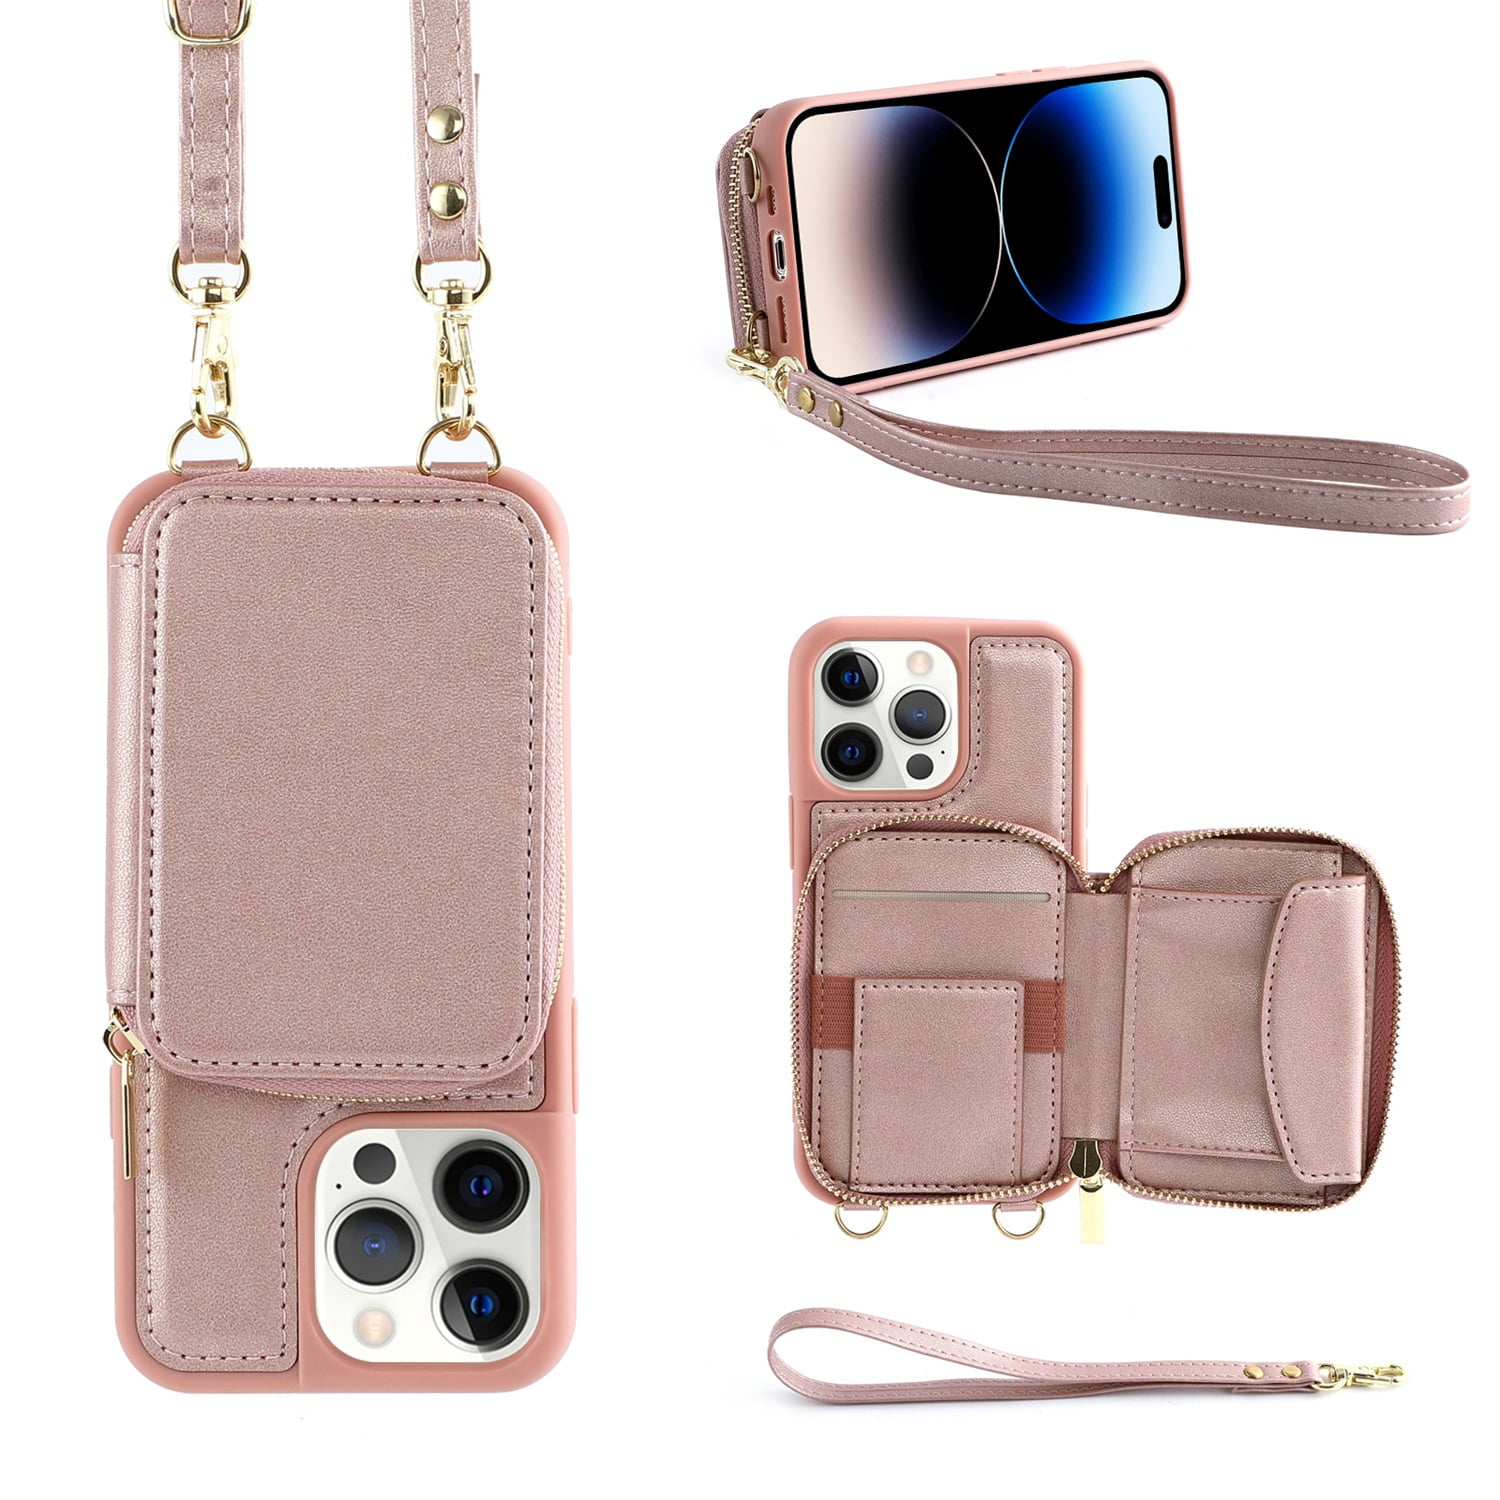 LUVI for iPhone 12 Pro Max Wallet Case with Crossbody Strap Lanyard Neck  Strap Credit Card